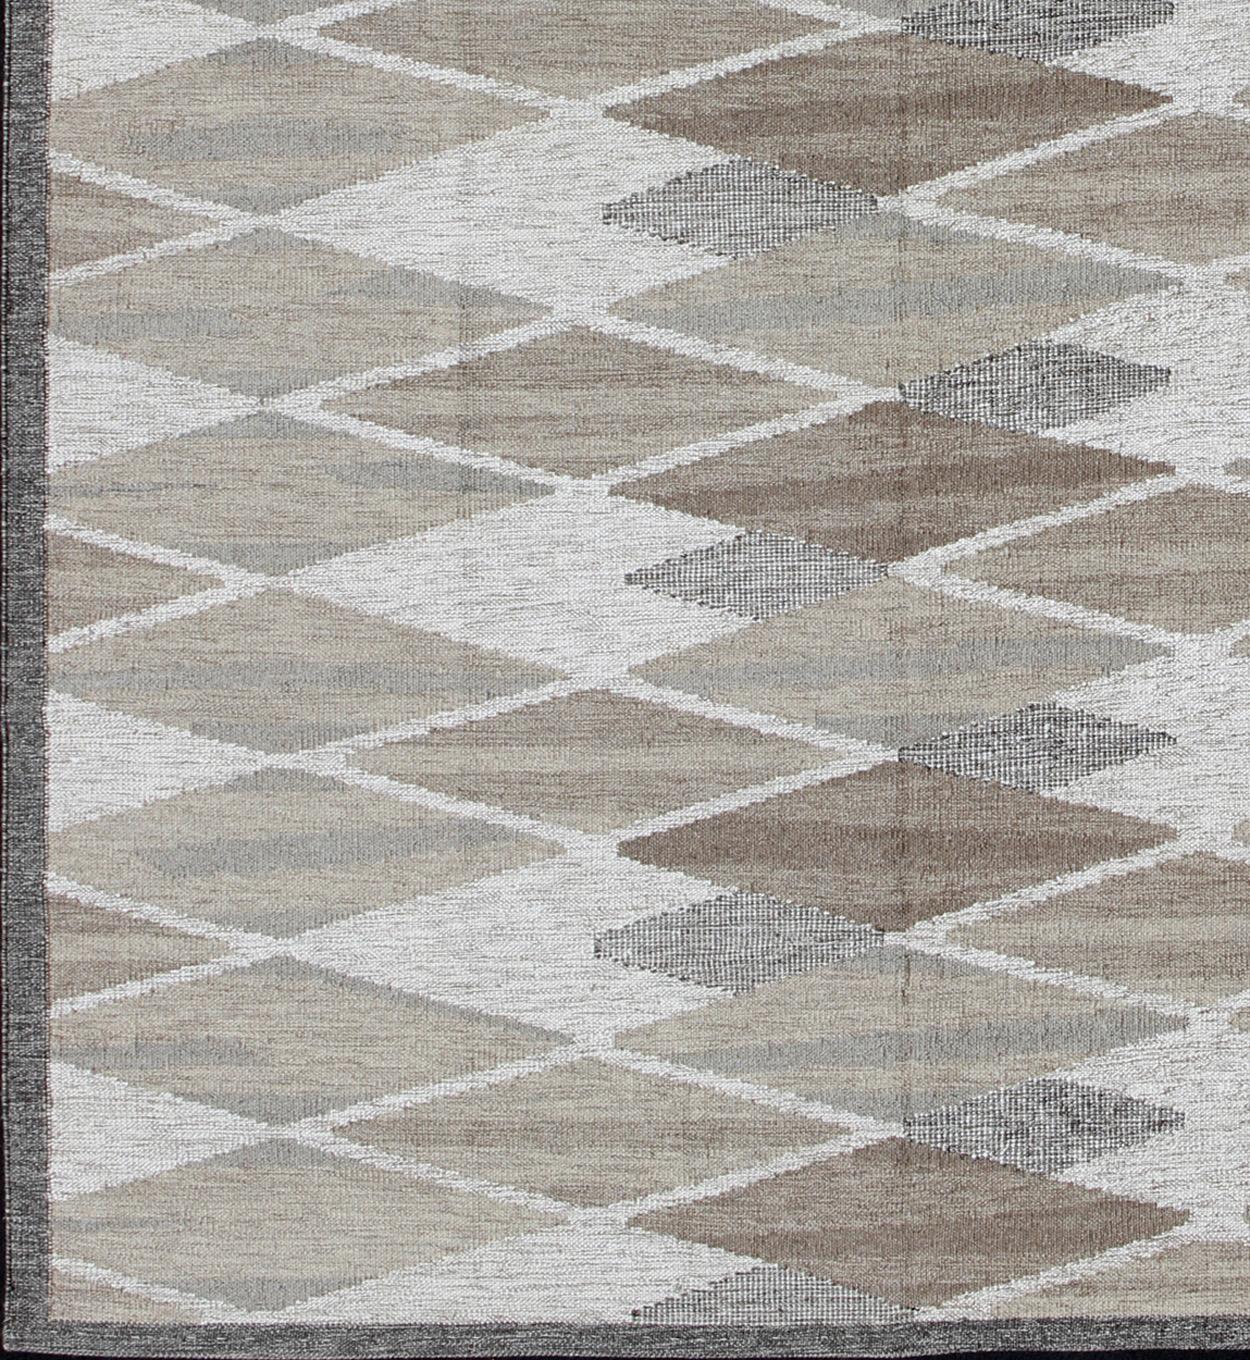 Modern design Scandinavian Flat weave Rug in All Over Diamond Motifs, Rug/KHN-504-SW-03, Modern Interiors, Modern Rug 

This Scandinavian flat-weave rug is inspired by the work of Swedish textile designers of the early to mid-20th century. With a